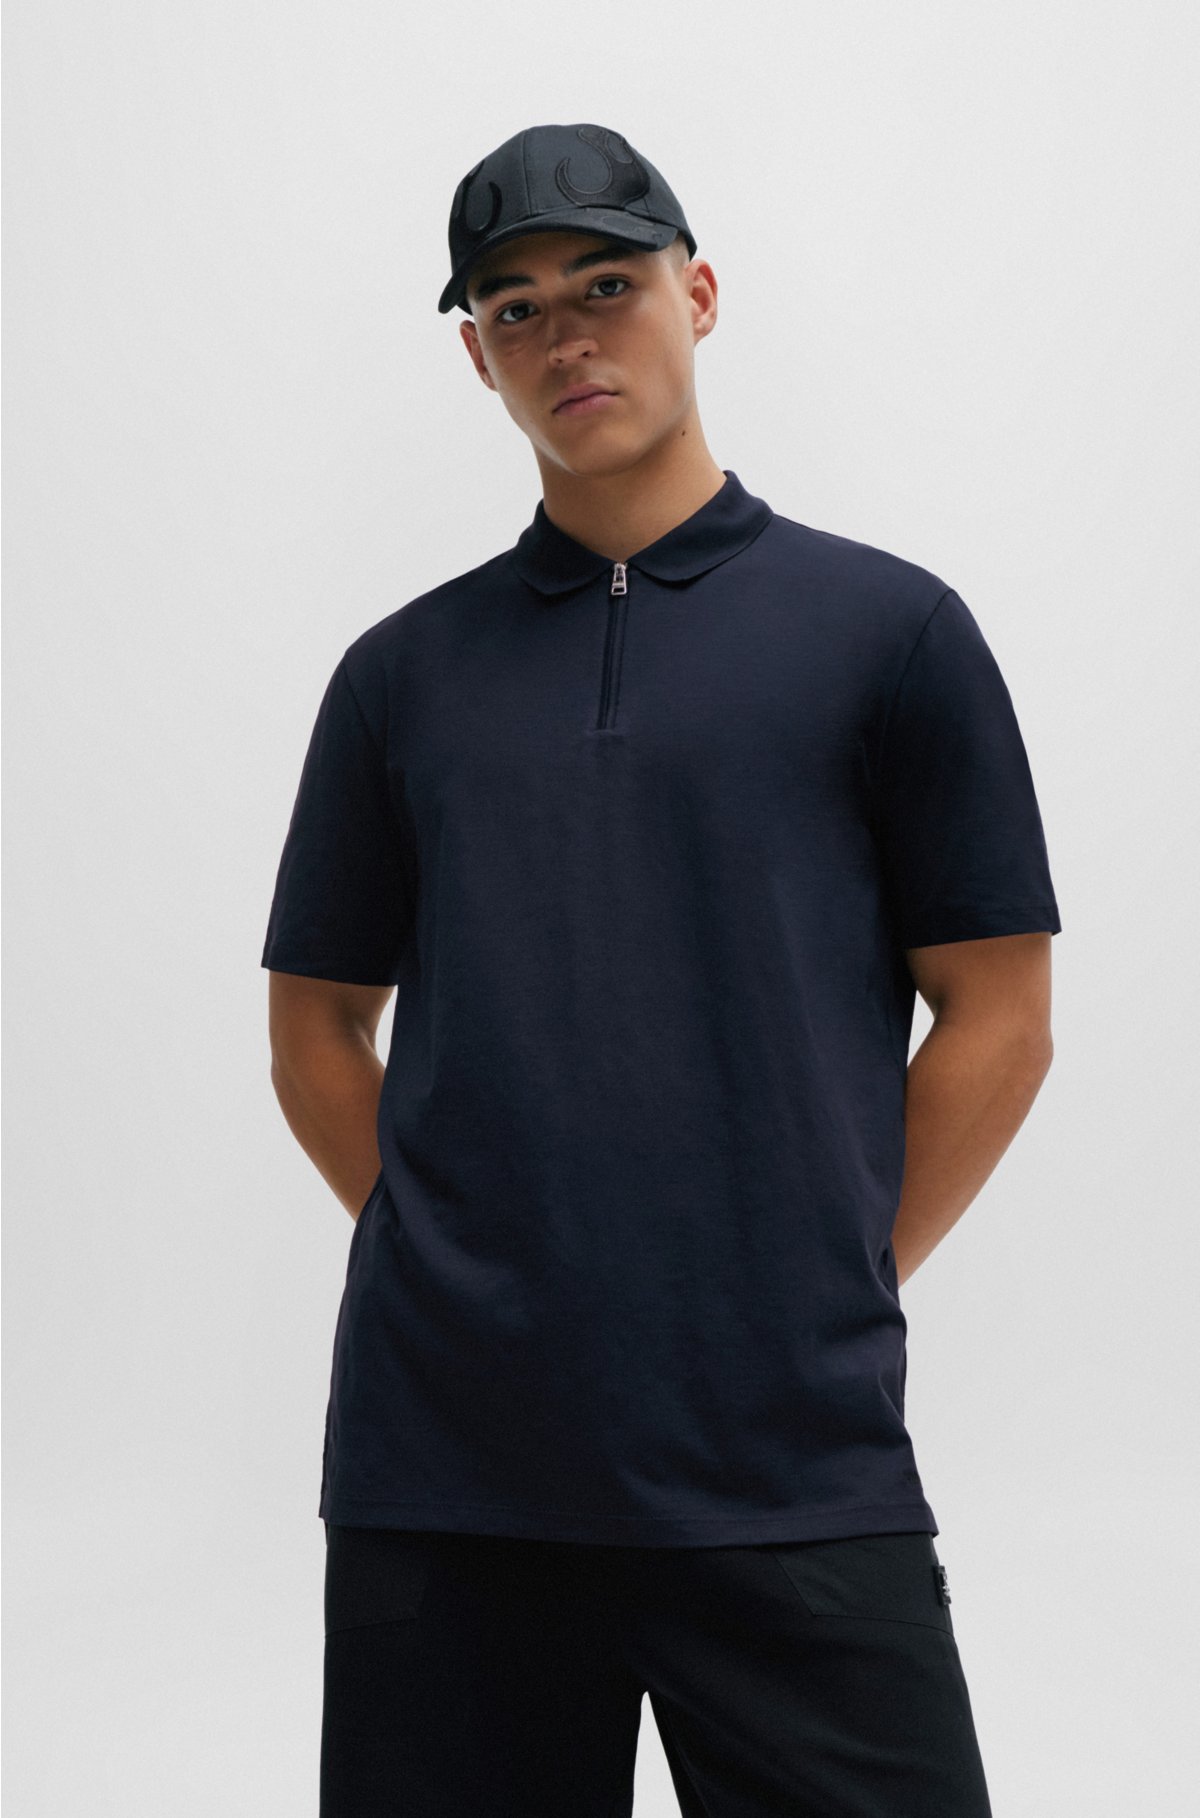 - Cotton-blend zip with shirt polo placket HUGO